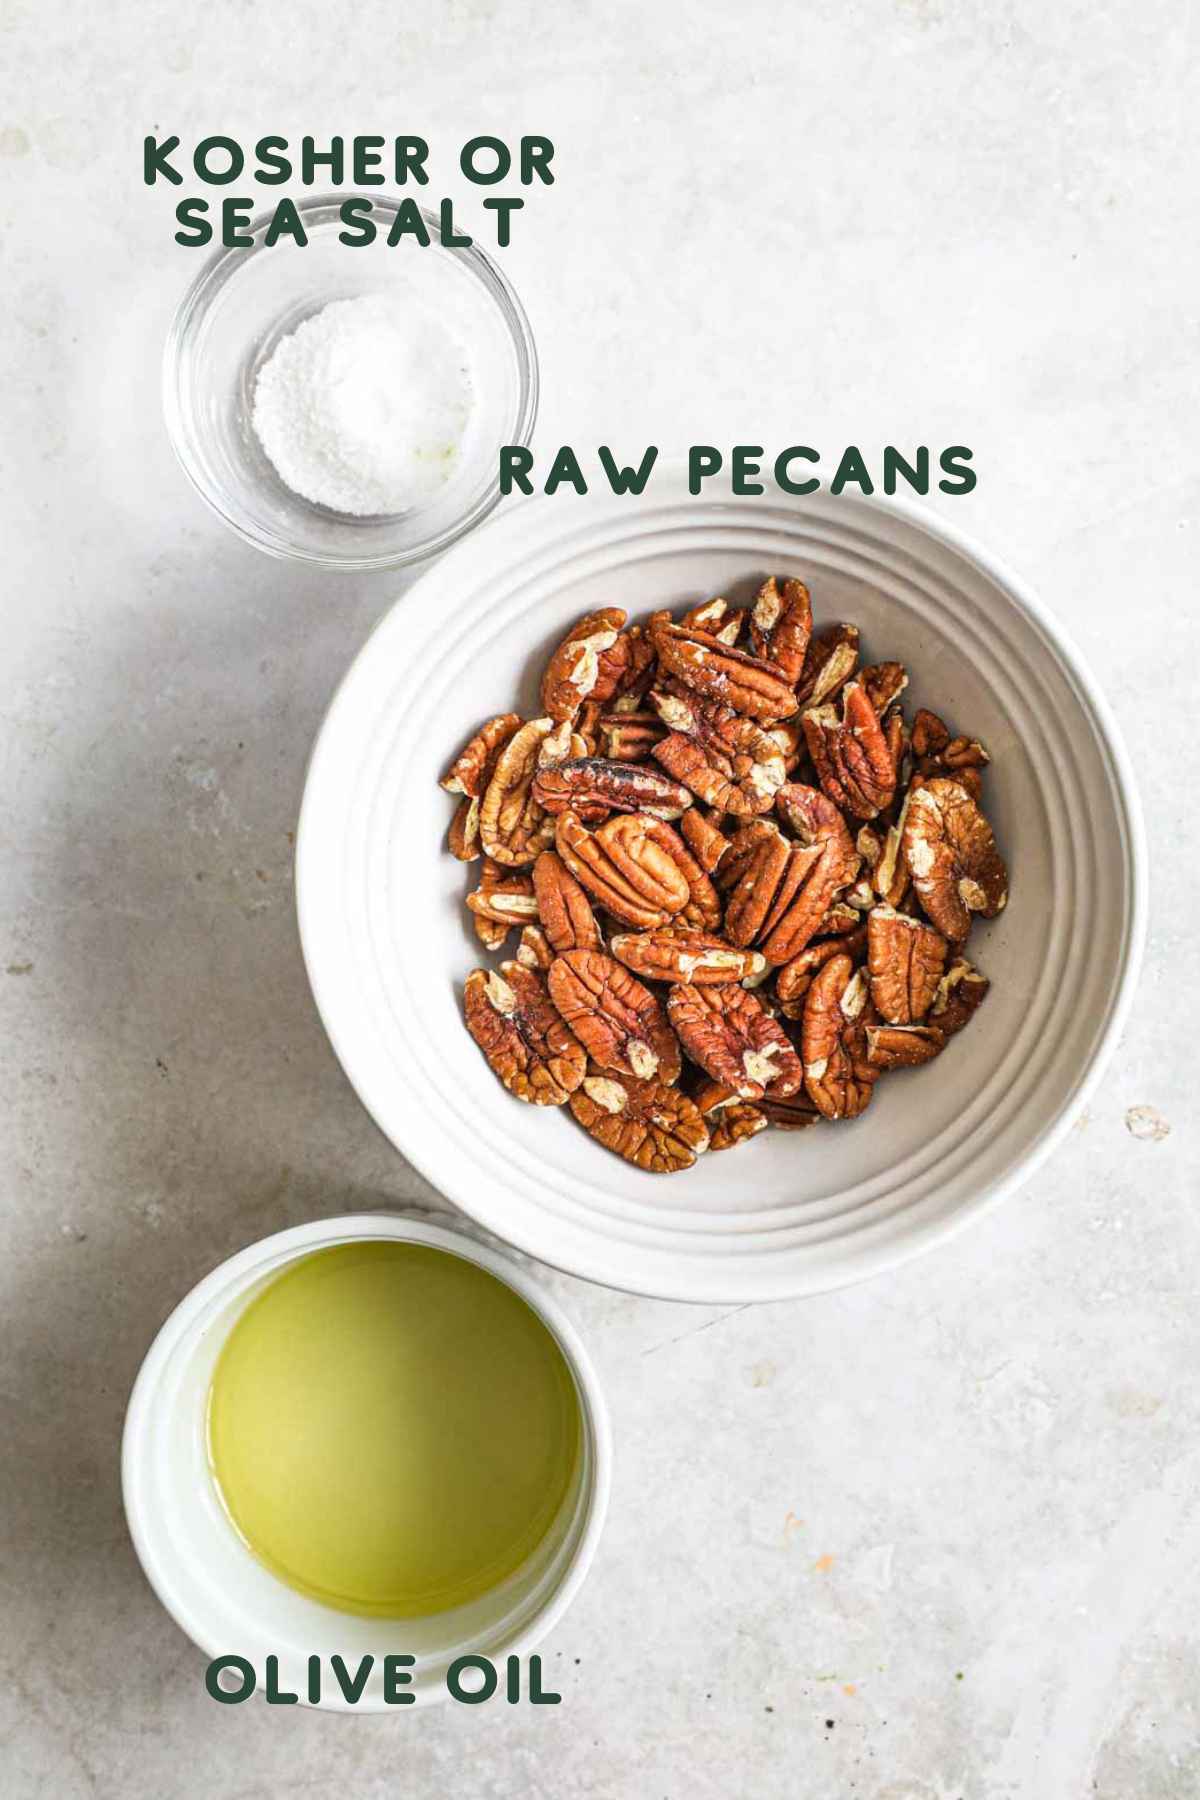 Ingredients to make toasted pecans, including raw pecans, olive oil, and salt.